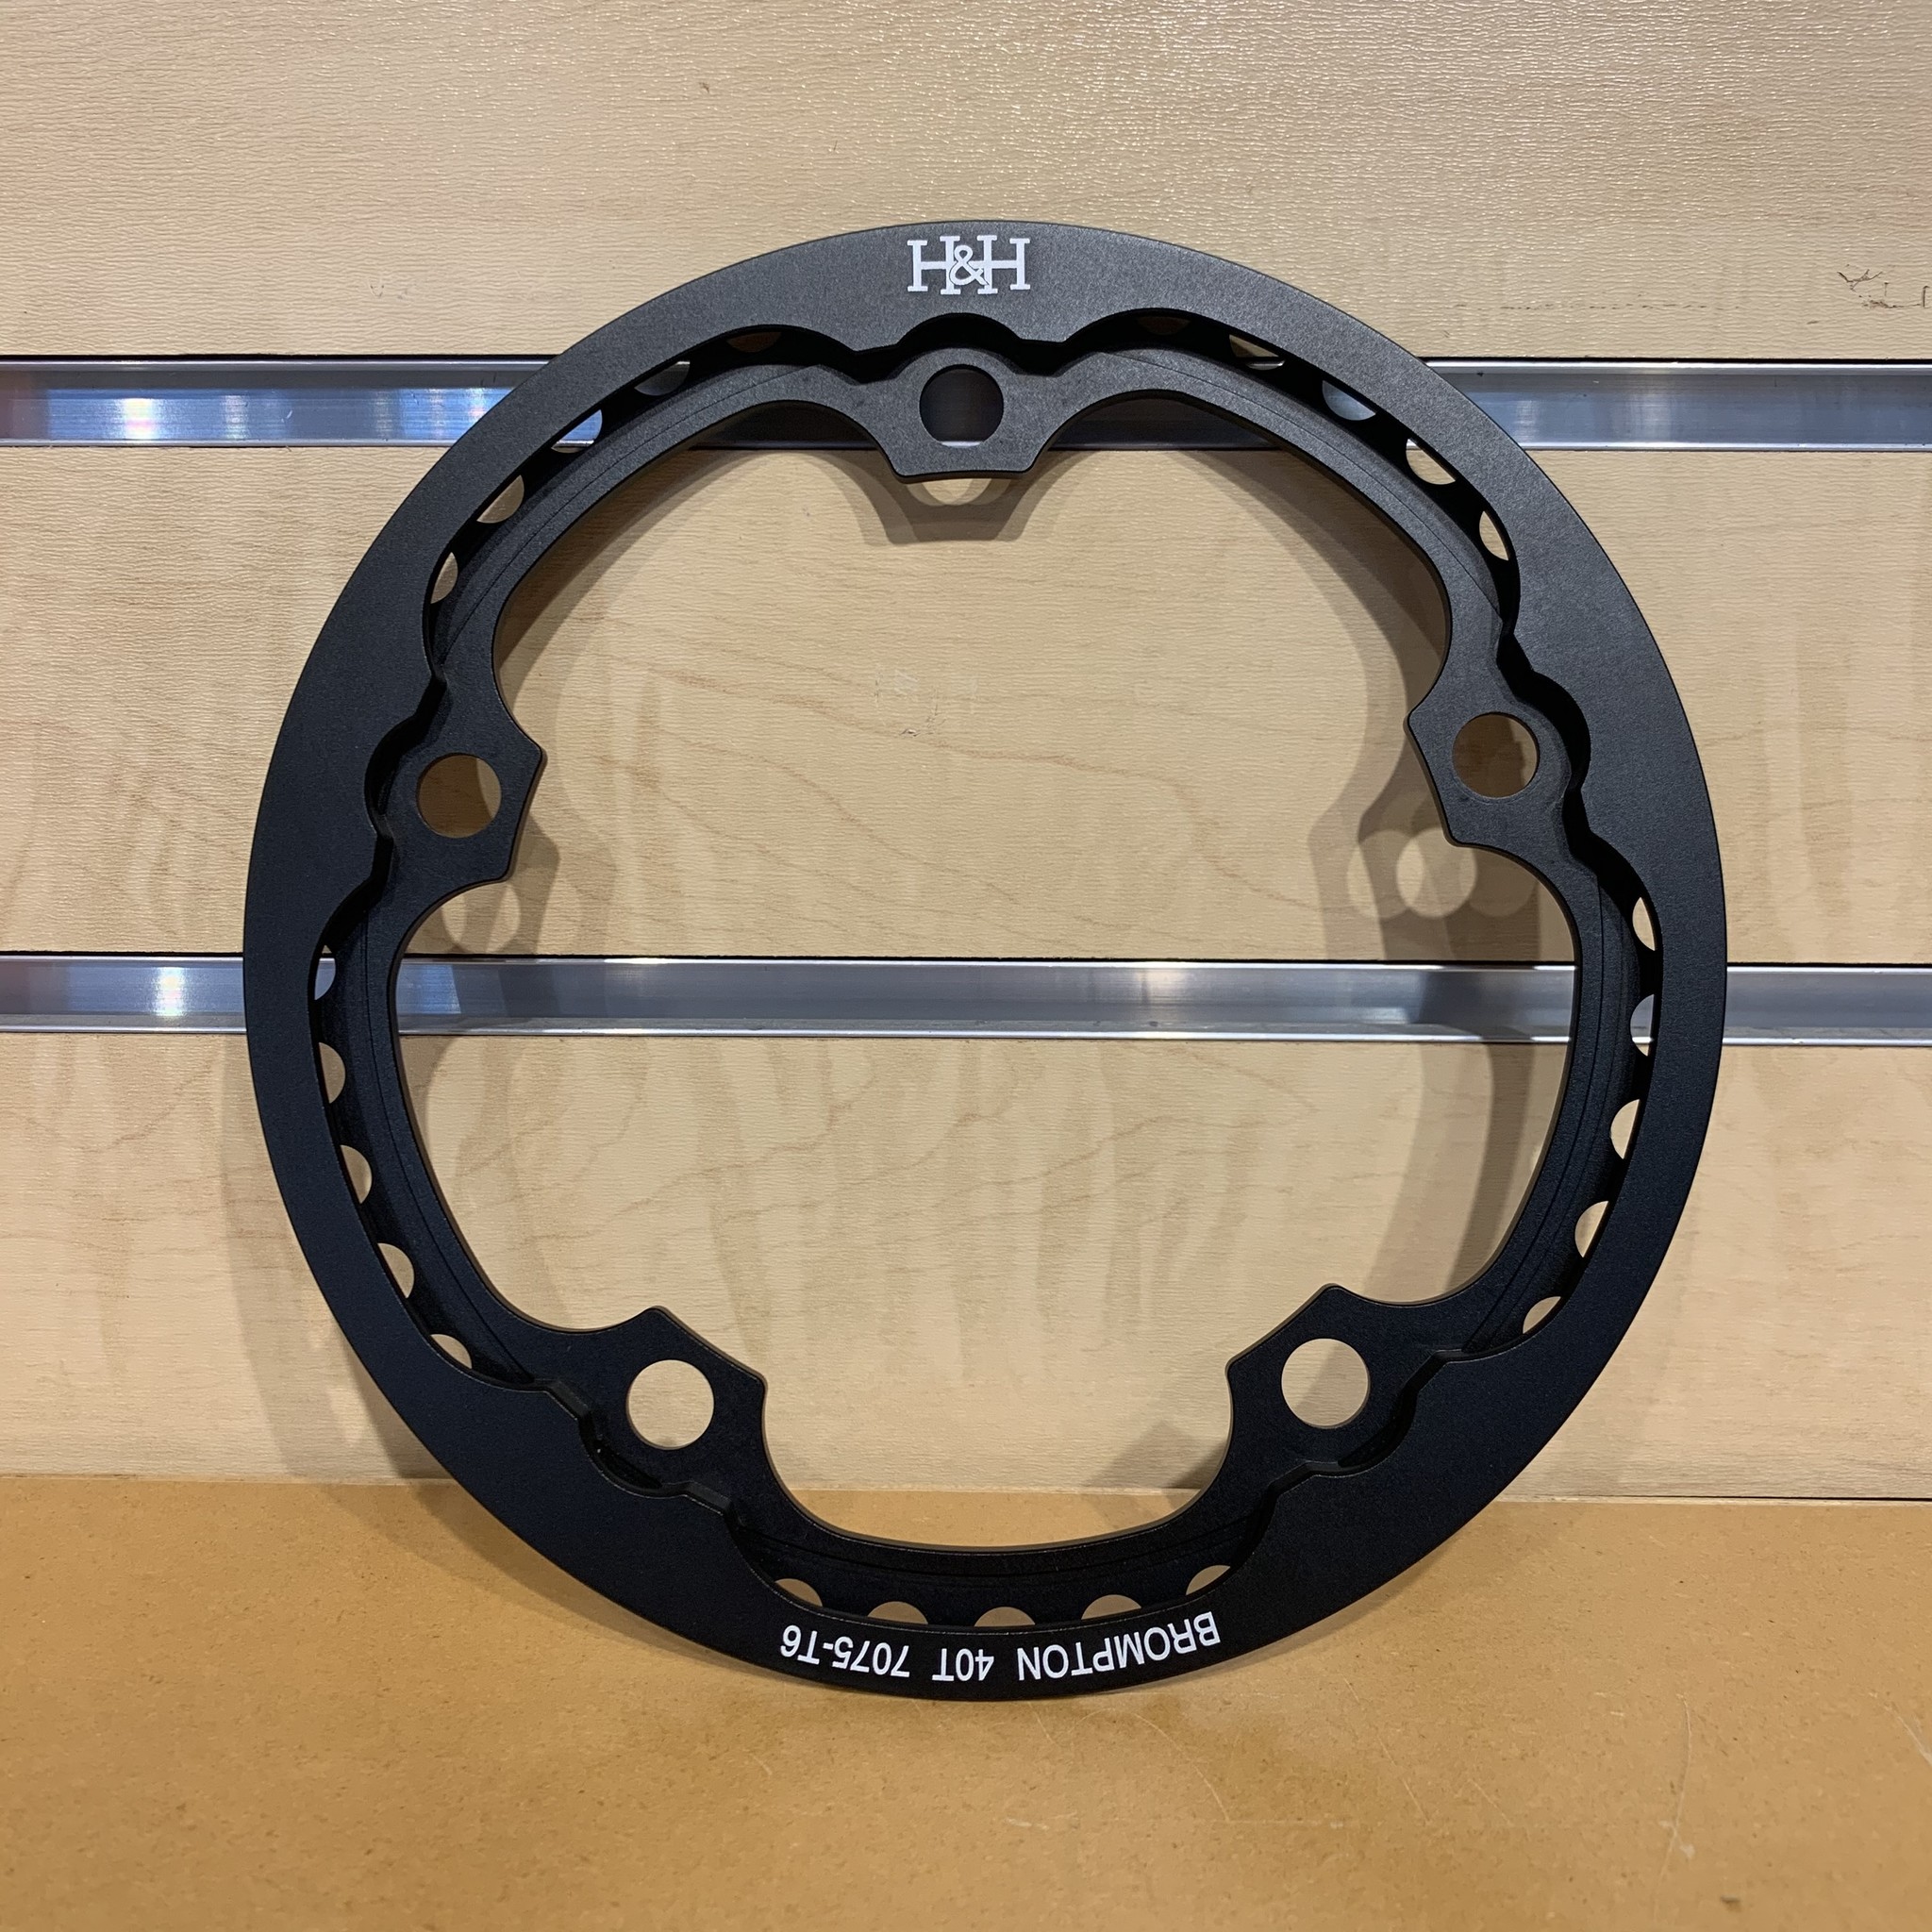 Brompton H&H 40t Aluminum Chainring with Integrated Chainguard - Clever